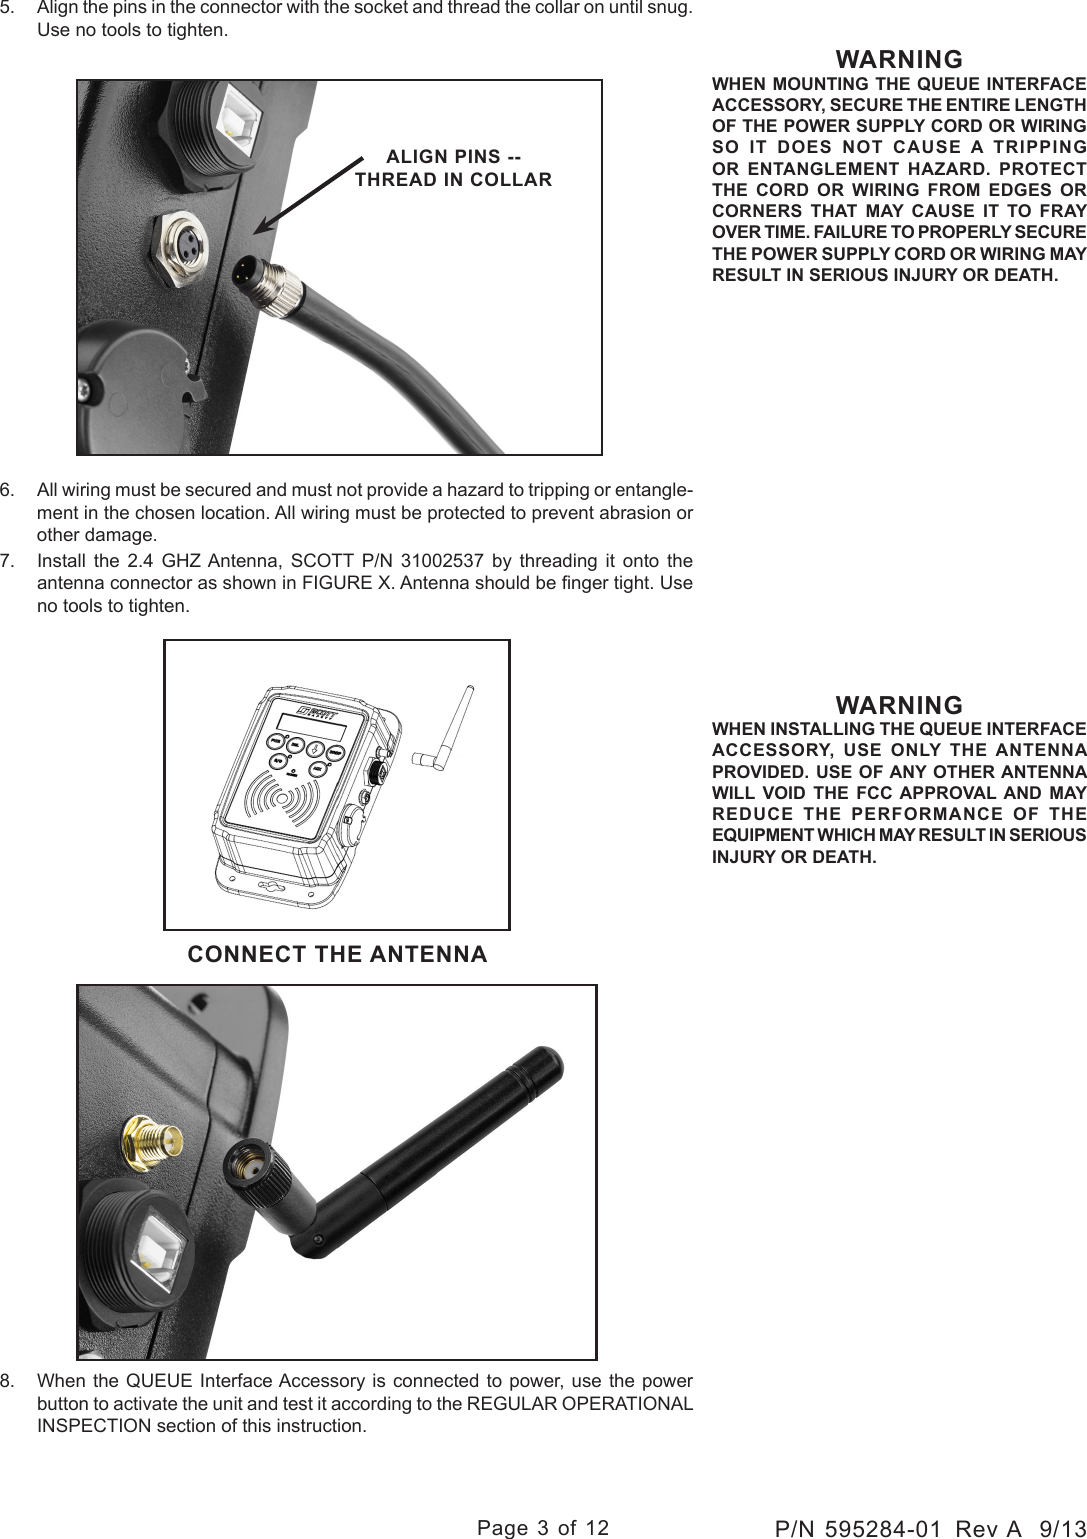 Page 3 of 12P/N 595284-01  Rev A  9/13WARNINGWHEN MOUNTING THE QUEUE INTERFACE ACCESSORY, SECURE THE ENTIRE LENGTH OF THE POWER SUPPLY CORD OR WIRING SO IT DOES NOT CAUSE A TRIPPING OR ENTANGLEMENT HAZARD. PROTECT THE CORD OR WIRING FROM EDGES OR CORNERS THAT MAY CAUSE IT TO FRAY OVER TIME. FAILURE TO PROPERLY SECURE THE POWER SUPPLY CORD OR WIRING MAY RESULT IN SERIOUS INJURY OR DEATH.CONNECT THE ANTENNAWARNINGWHEN INSTALLING THE QUEUE INTERFACE ACCESSORY, USE ONLY THE ANTENNA PROVIDED. USE OF ANY OTHER ANTENNA WILL VOID THE FCC APPROVAL AND MAY REDUCE THE PERFORMANCE OF THE EQUIPMENT WHICH MAY RESULT IN SERIOUS INJURY OR DEATH.5.  Align the pins in the connector with the socket and thread the collar on until snug. Use no tools to tighten.6.  All wiring must be secured and must not provide a hazard to tripping or entangle-ment in the chosen location. All wiring must be protected to prevent abrasion or other damage.7.  Install  the  2.4  GHZ Antenna,  SCOTT  P/N  31002537  by  threading  it  onto  the antenna connector as shown in FIGURE X. Antenna should be nger tight. Use no tools to tighten.8.  When the QUEUE Interface Accessory is connected to power, use the power button to activate the unit and test it according to the REGULAR OPERATIONAL INSPECTION section of this instruction.ALIGN PINS -- THREAD IN COLLAR